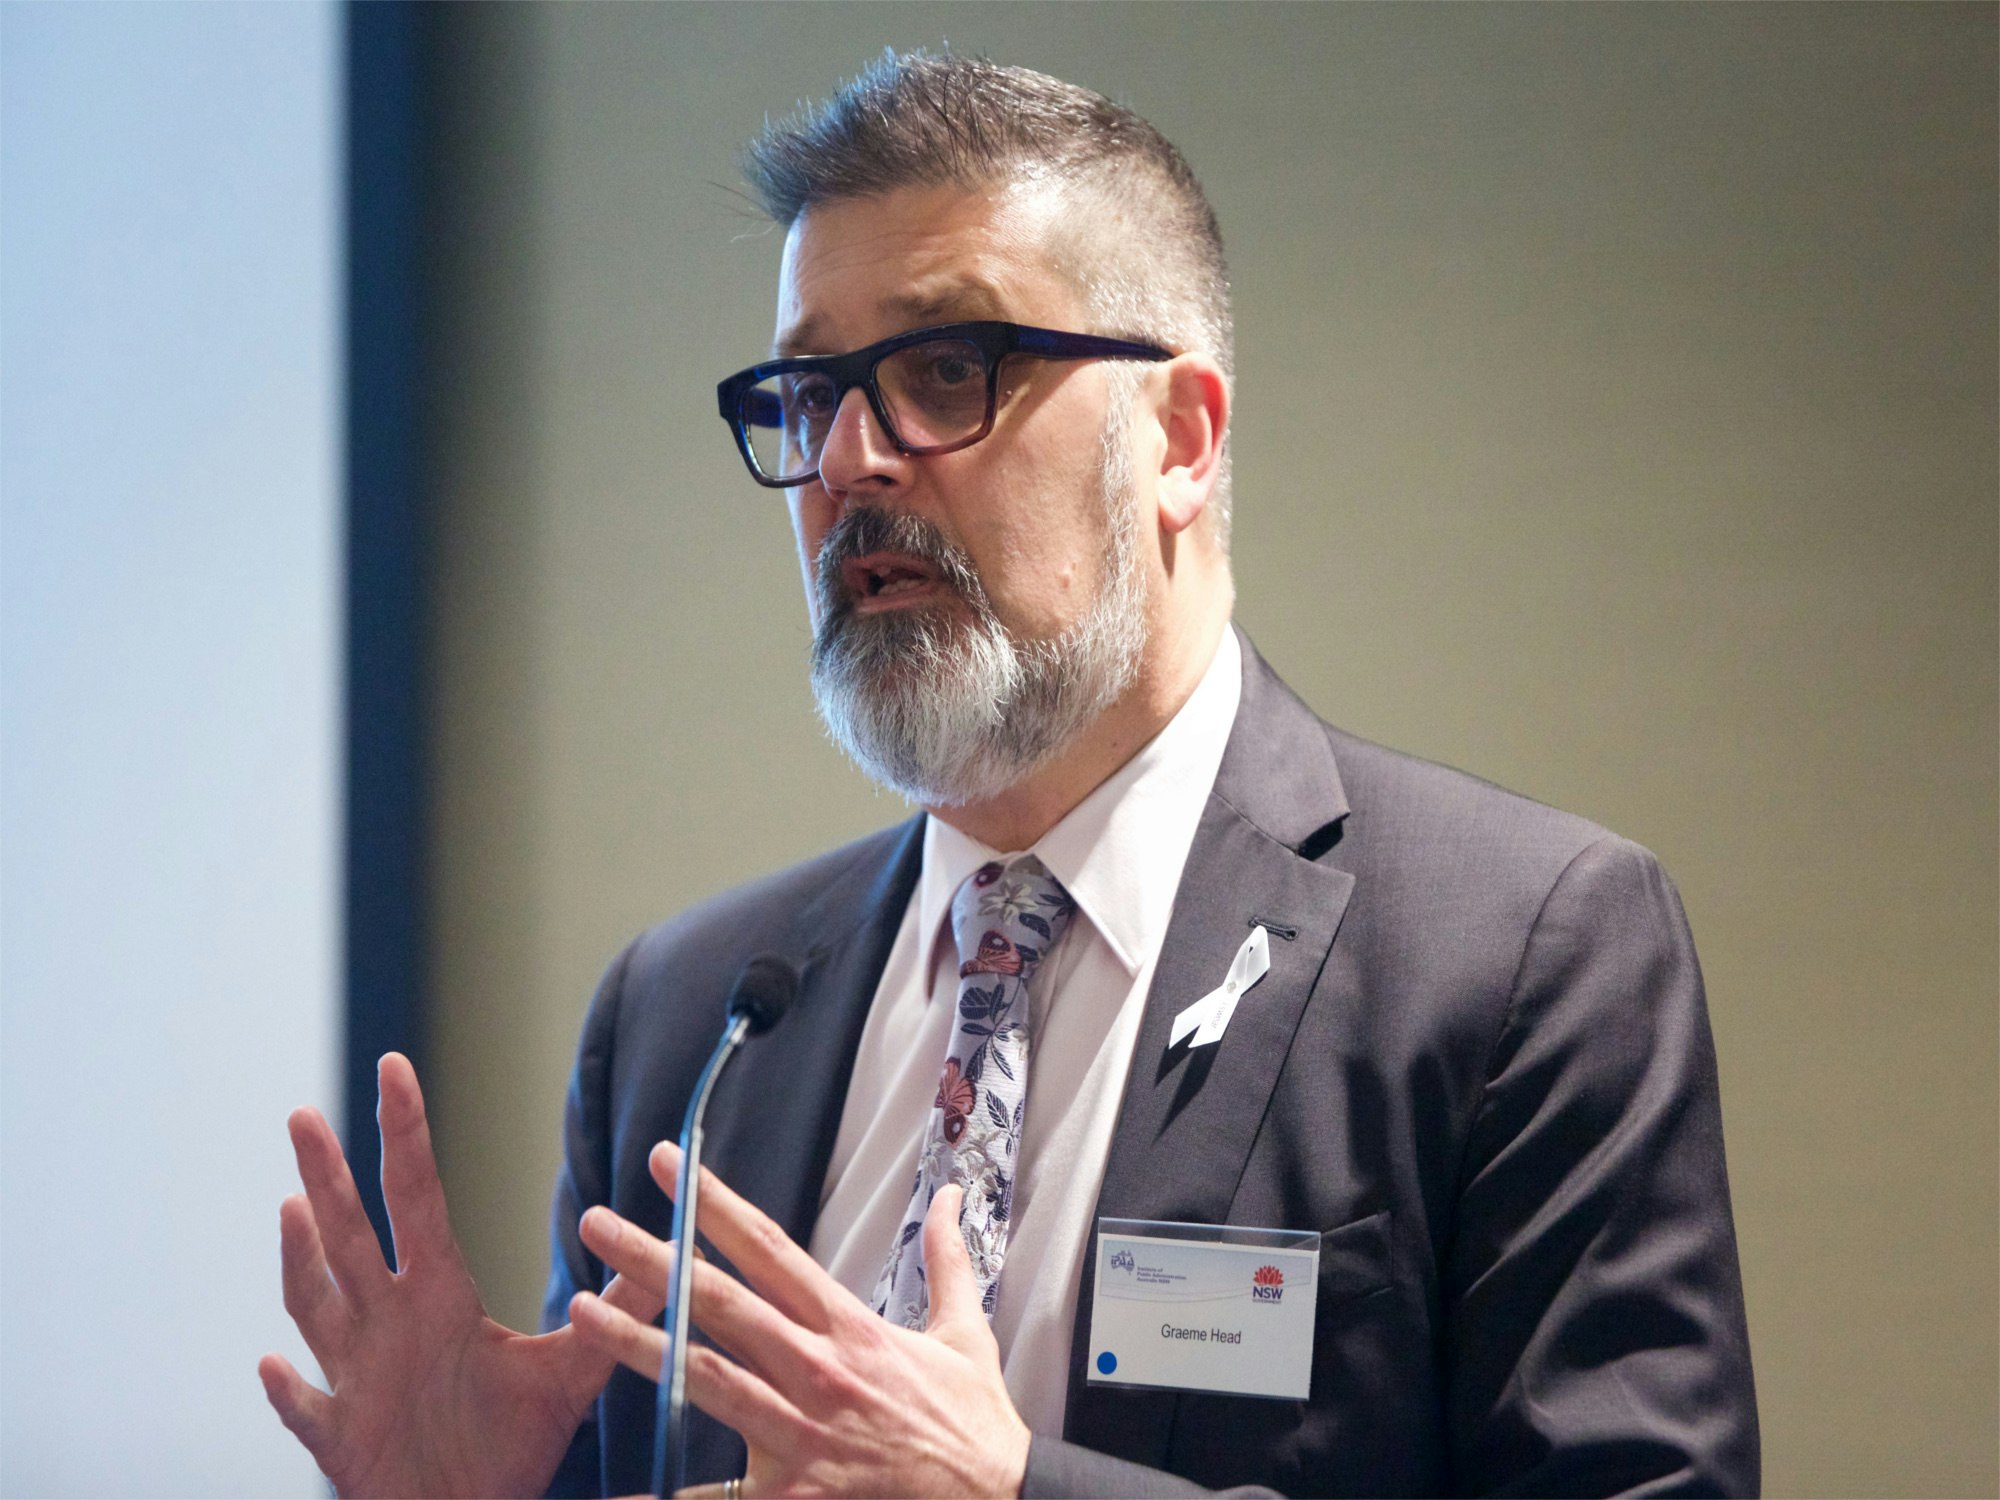 Current NSW Public Service Commissioner Graeme Head has been chosen to lead the NDIS Quality and Safeguard Commission. (Source: NSW Government)
